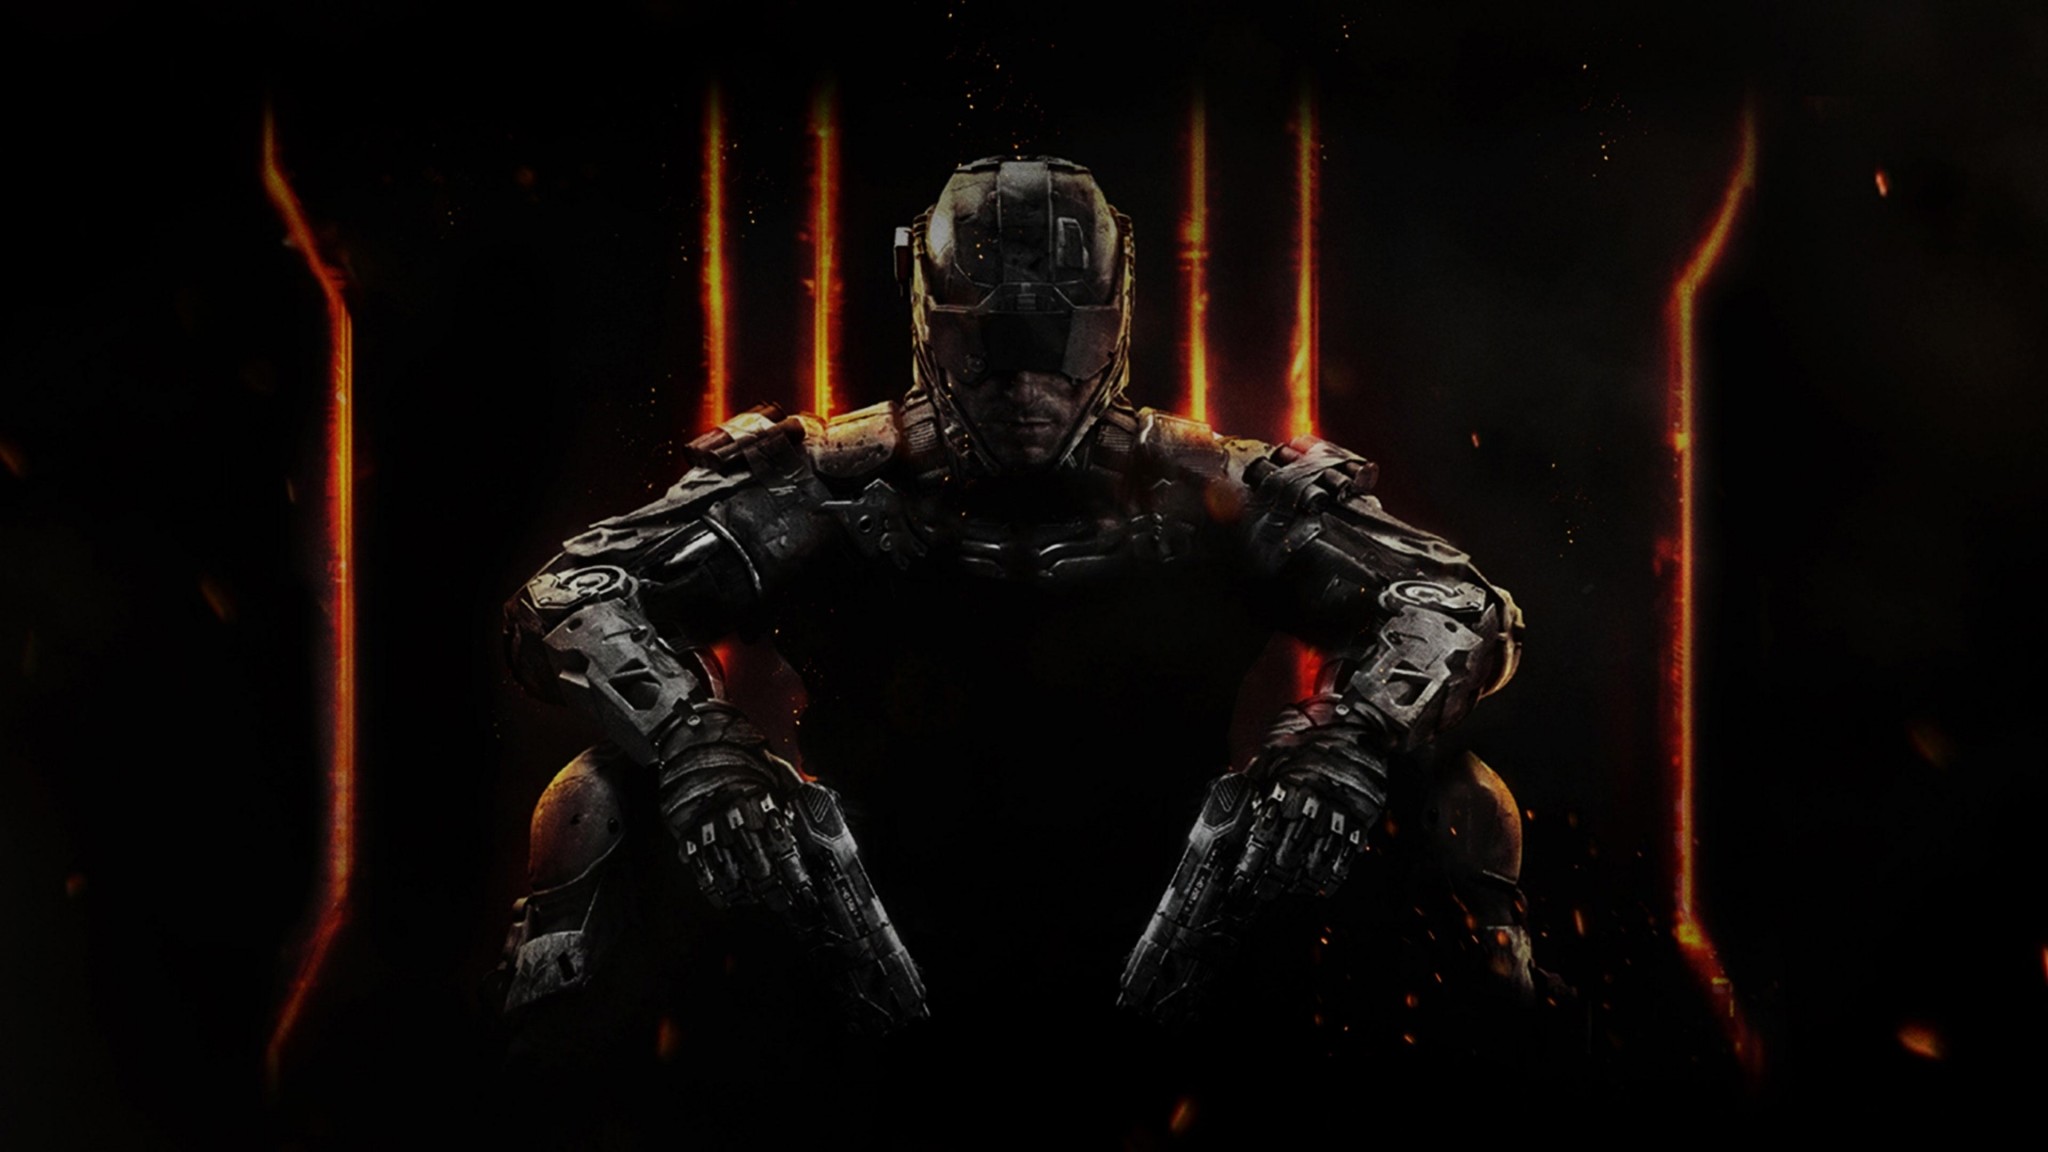 2048x1152 cod hd widescreen wallpapers Â· Black Ops 3The ...